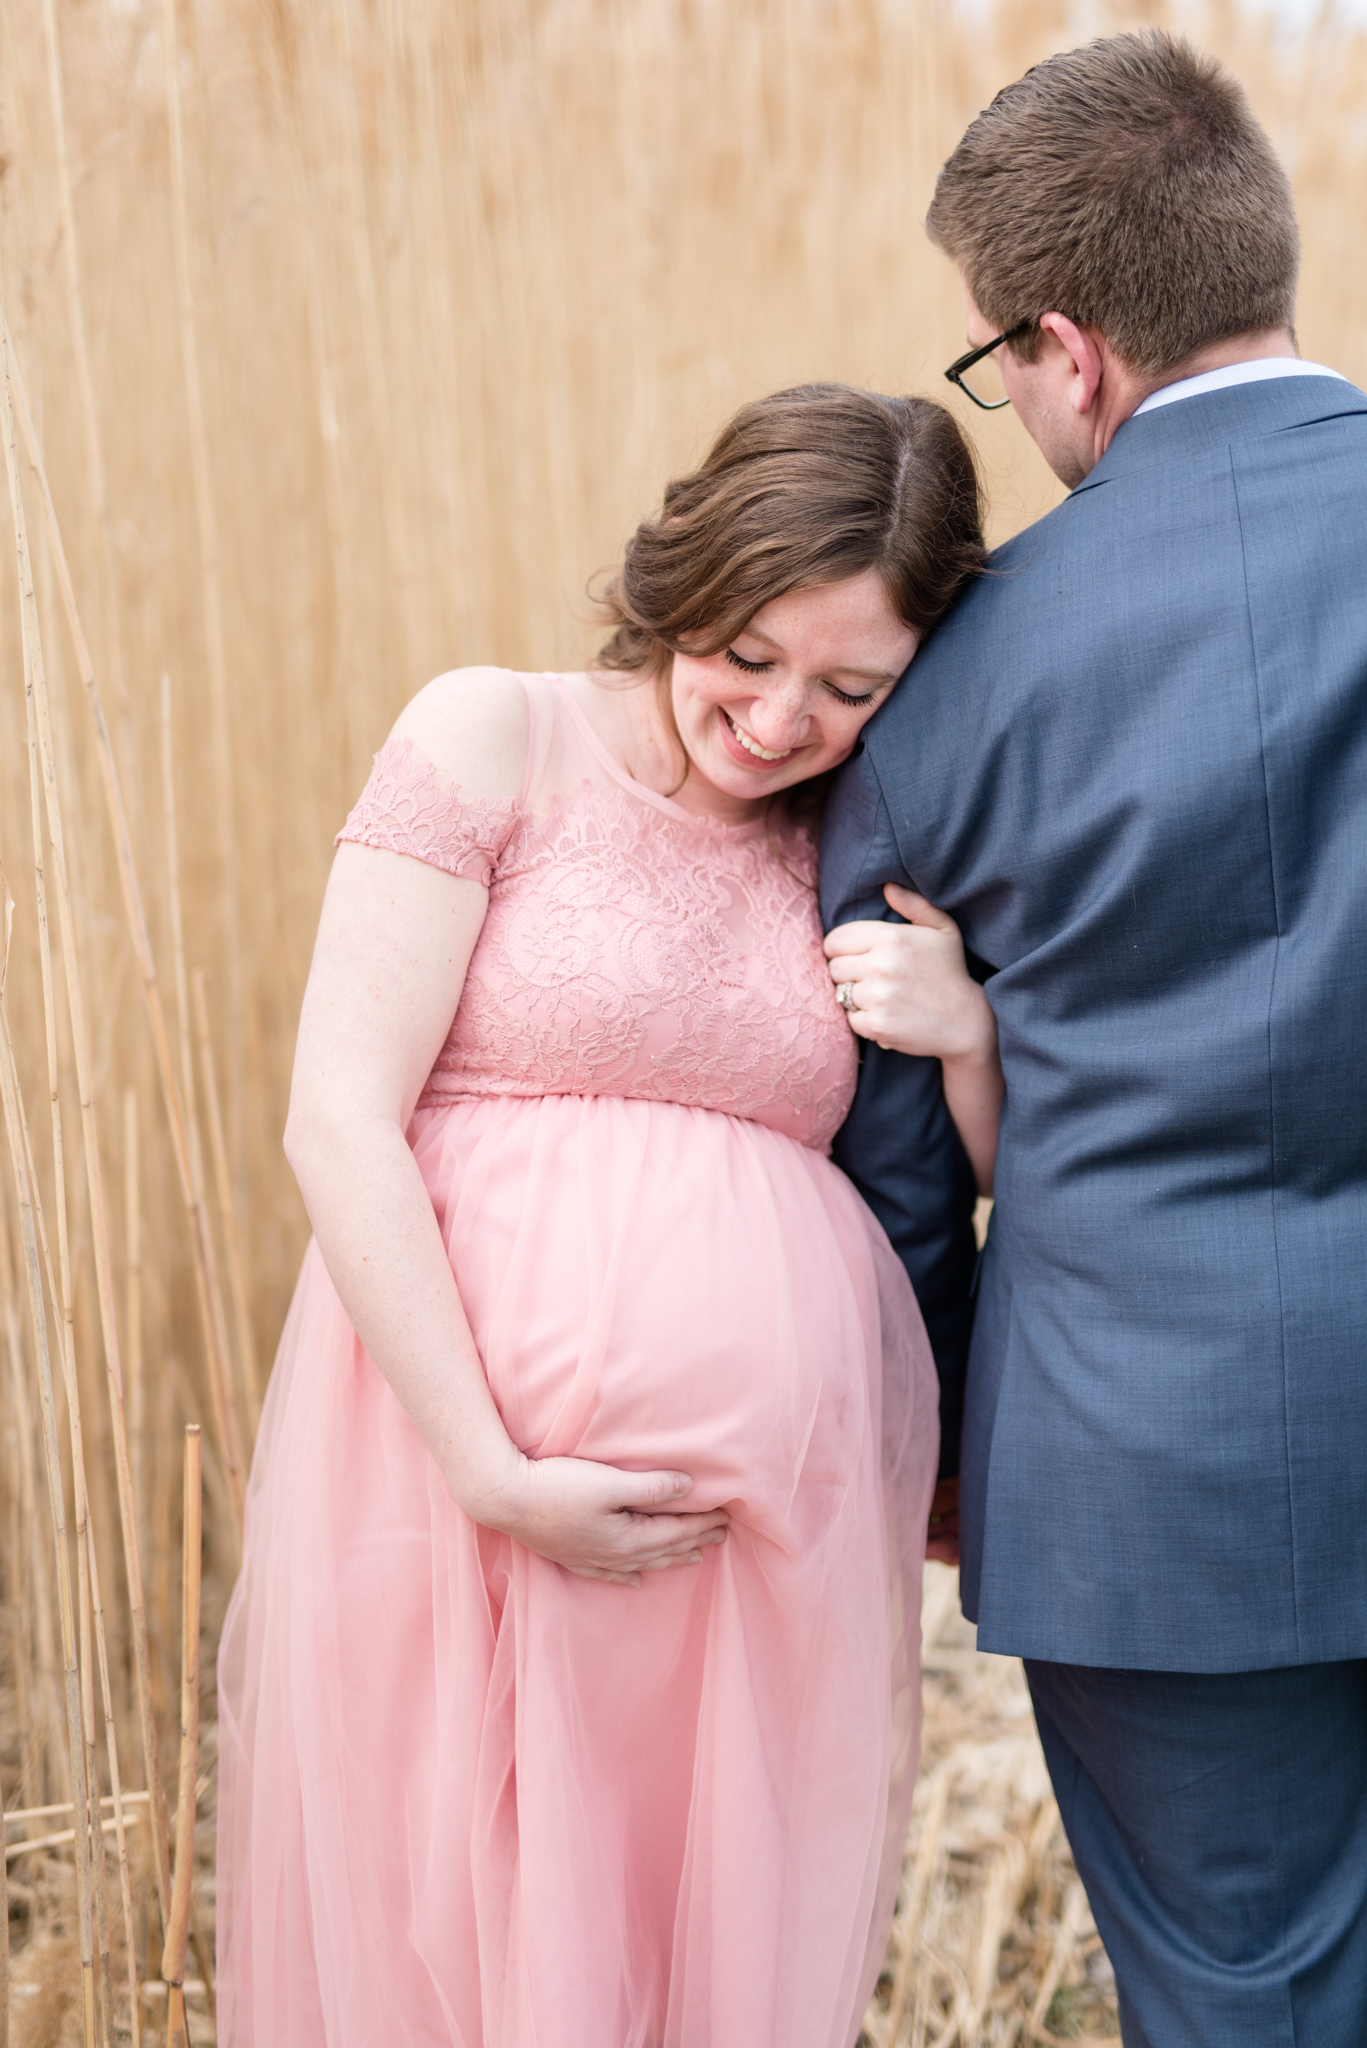 Pregnant mom leans on husband and looks down.